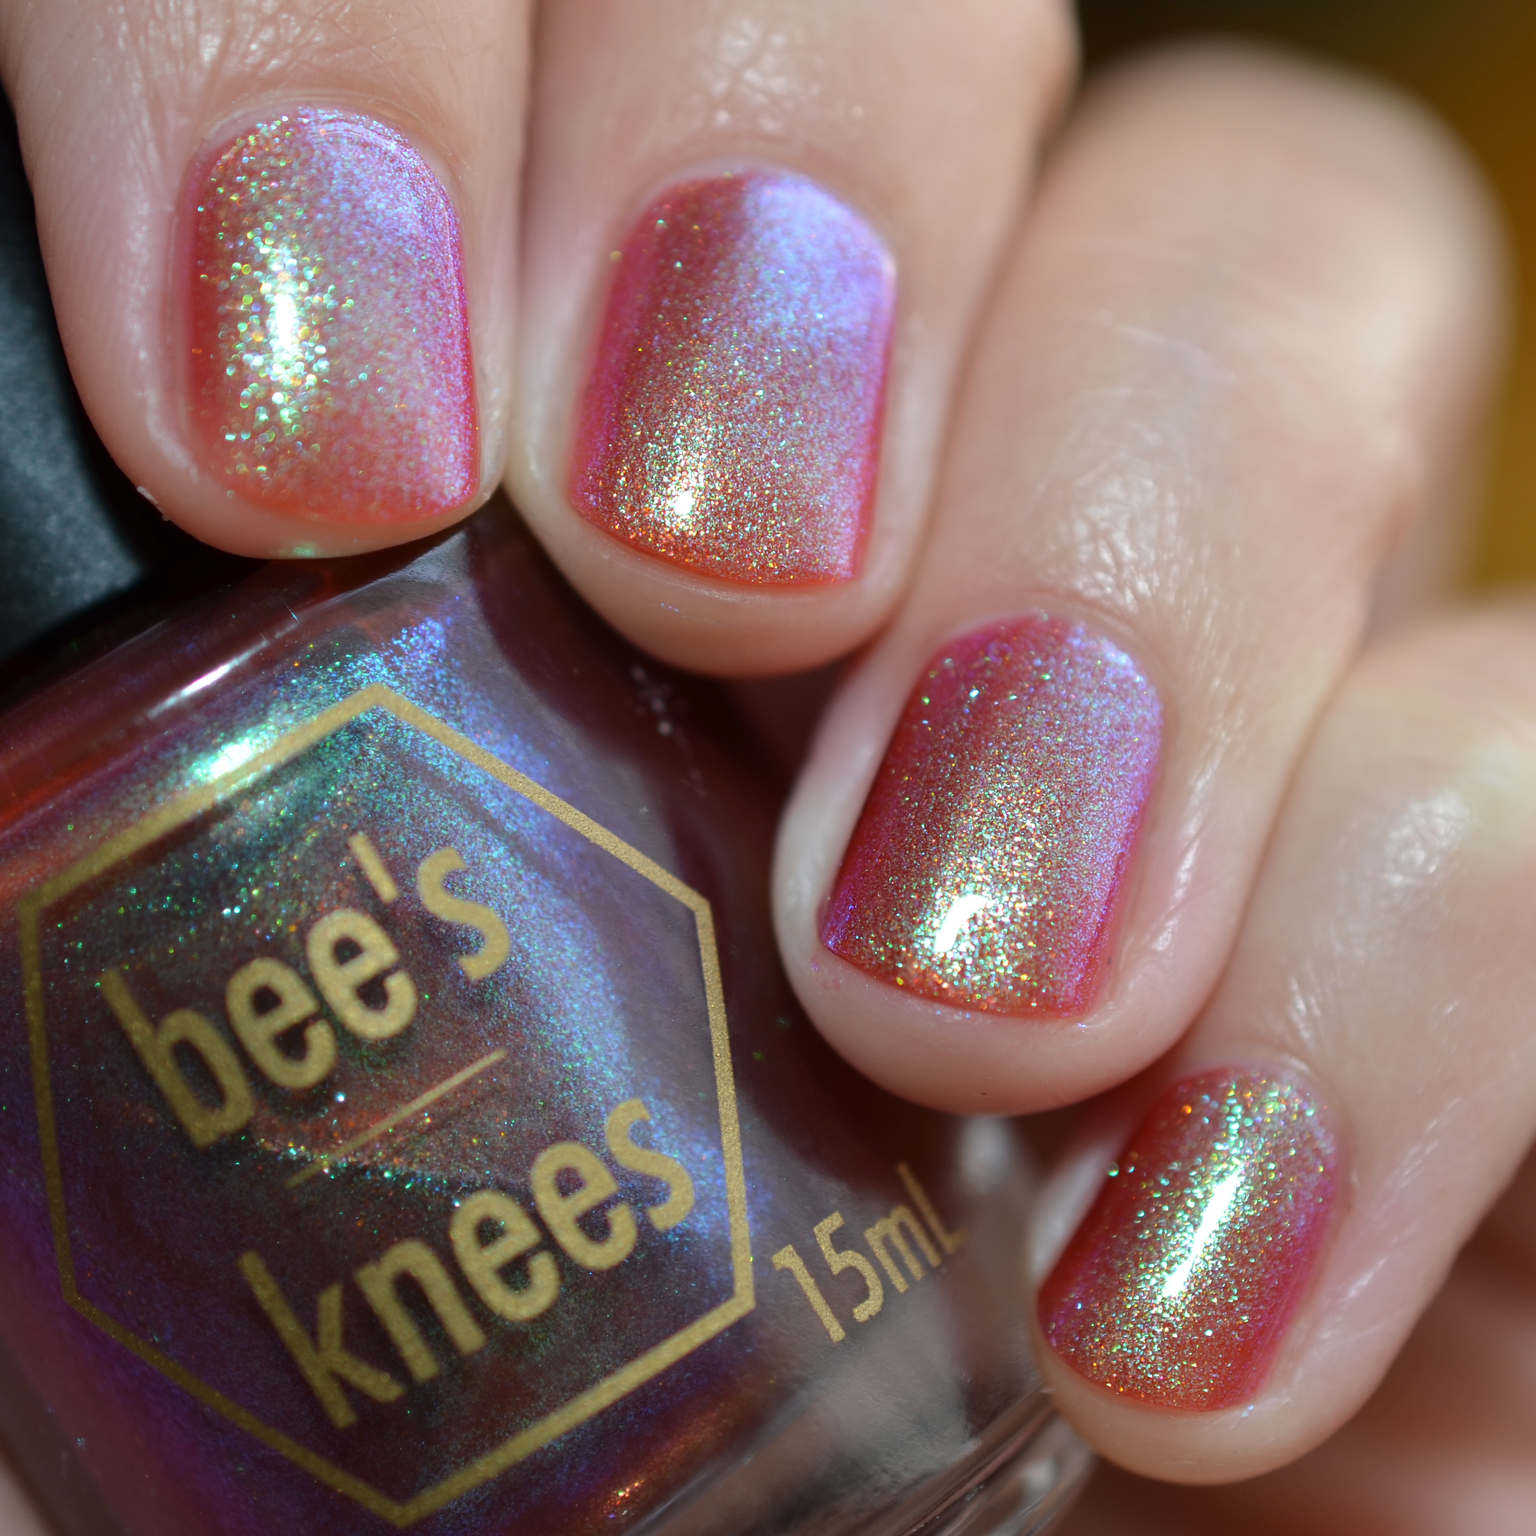 Bee's Knees Lacquer - Let's Give Them Hell